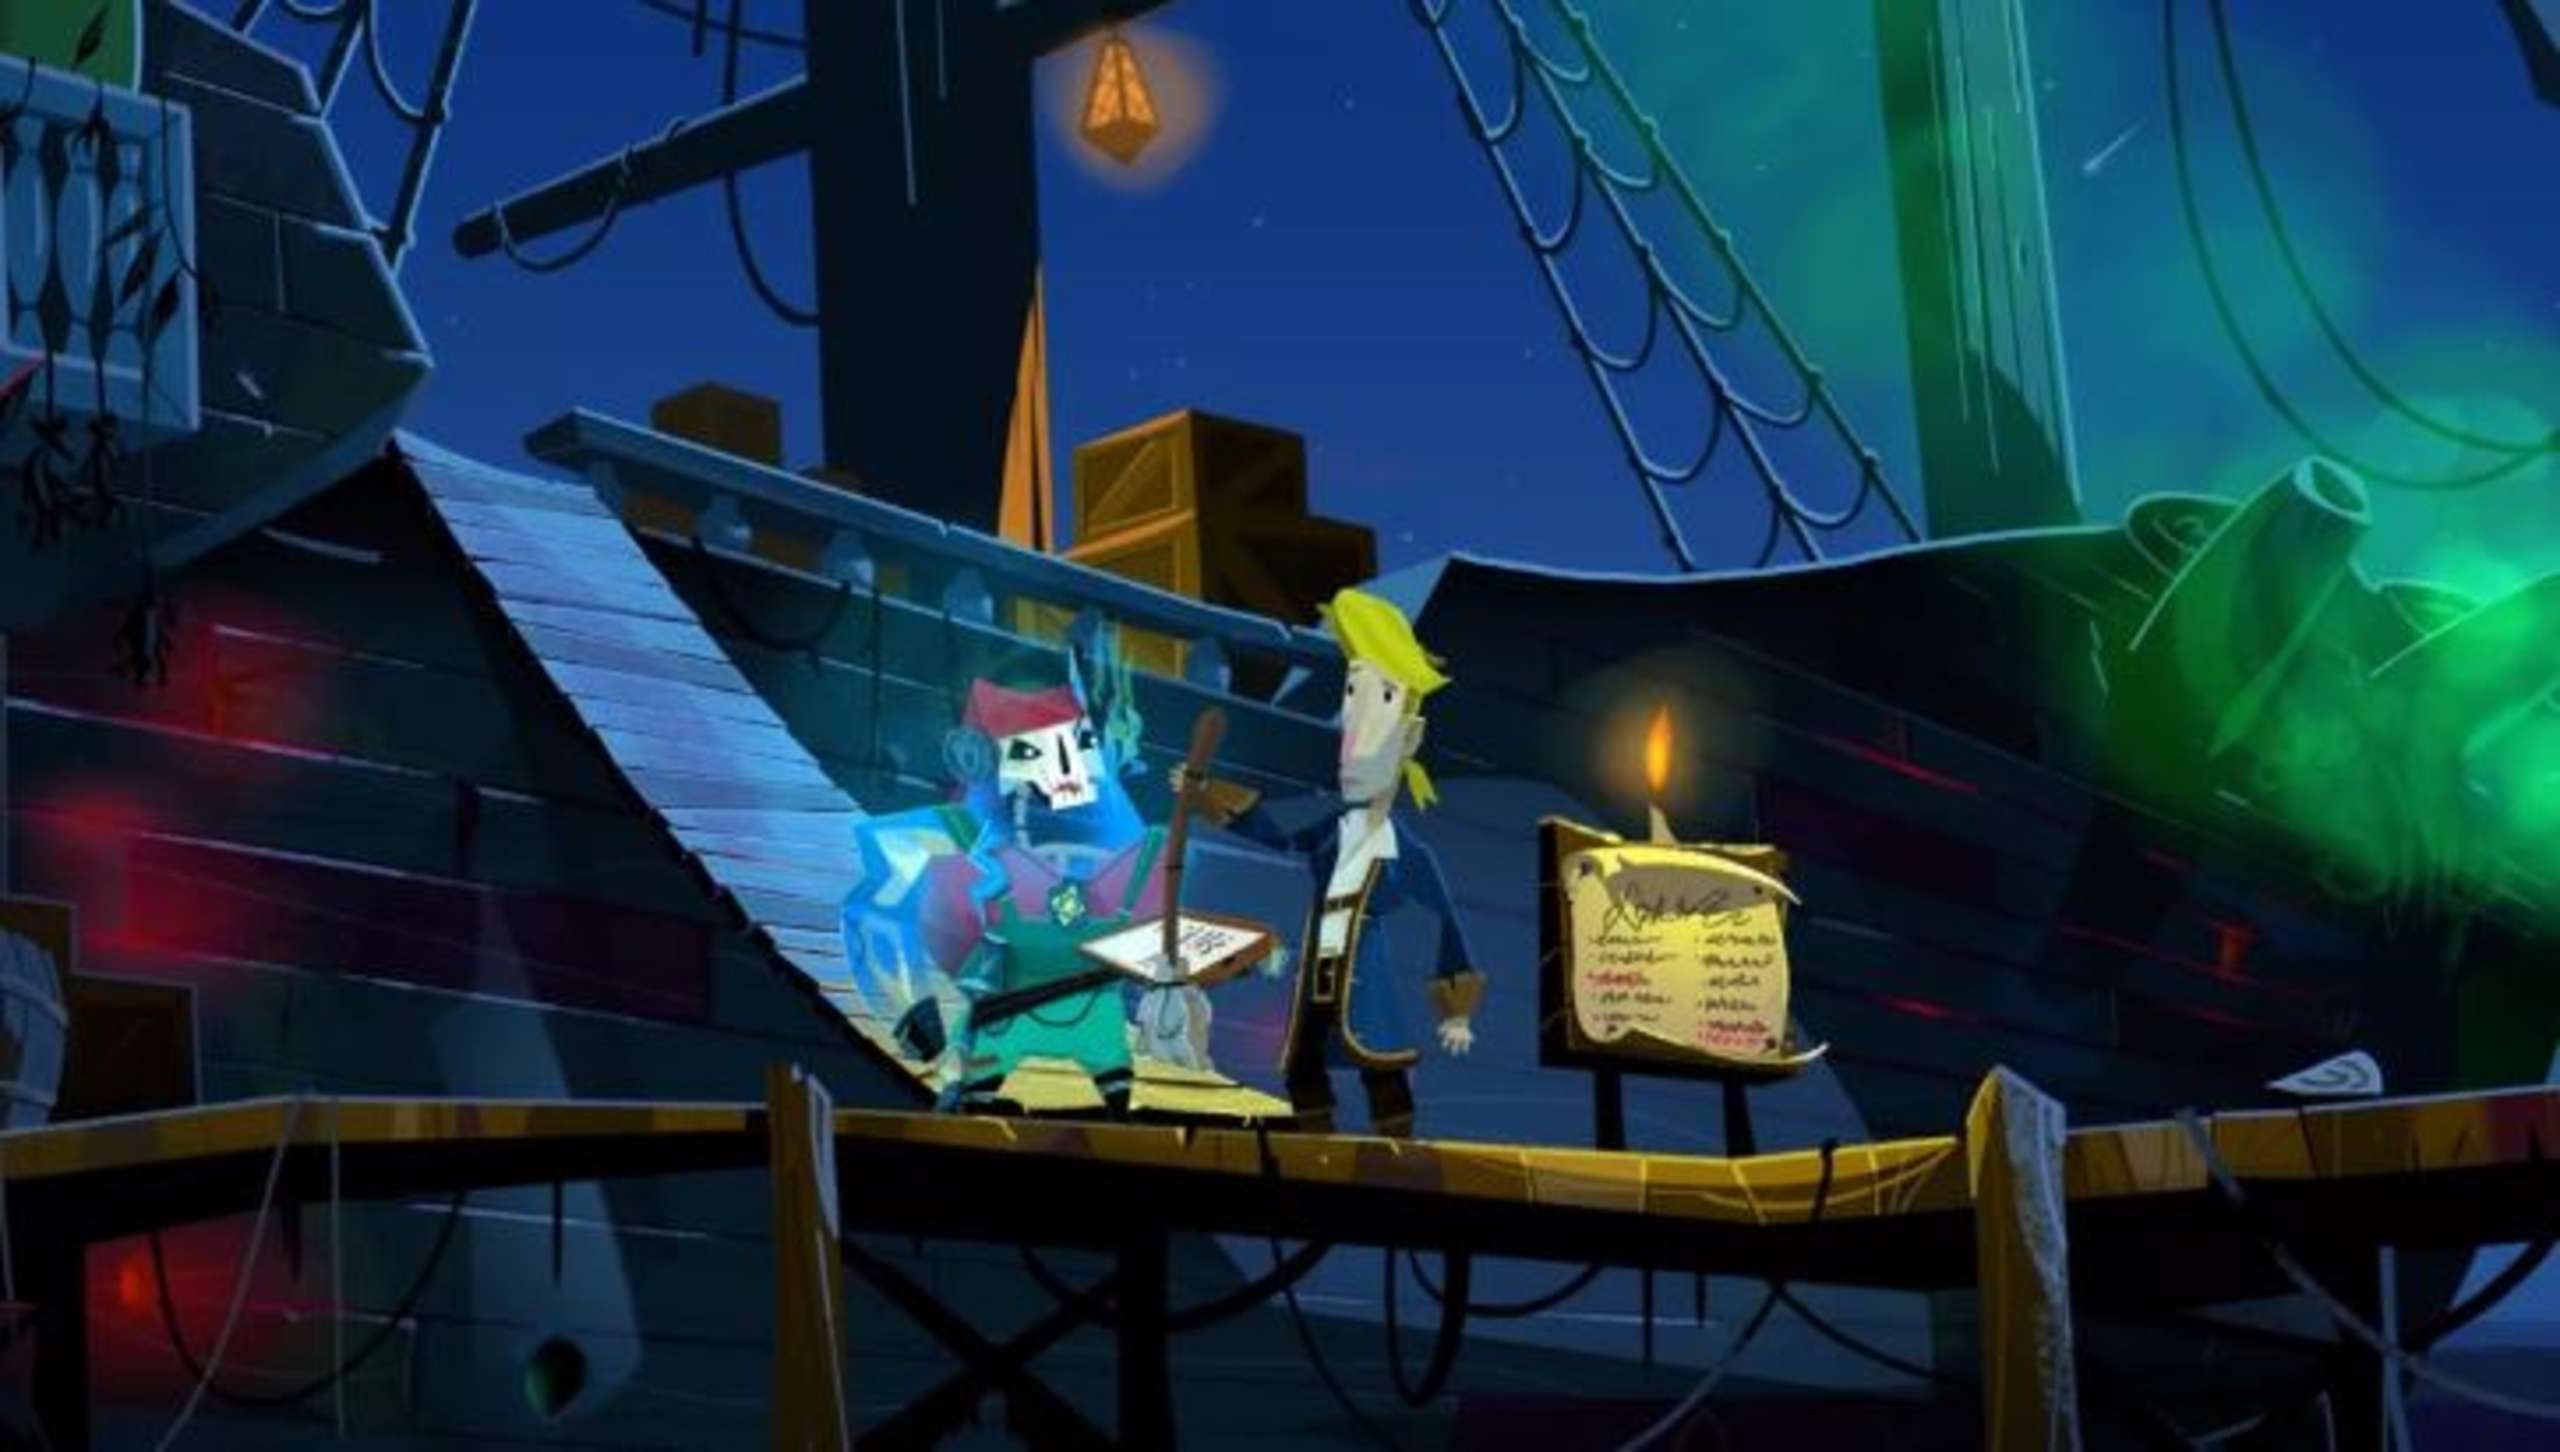 In Return To Monkey Island, The Player Must Figure Out A Way To Prevent The Quartermaster From Learning Guybrush’s Identity Before He Or She May Board LeChuck’s Ship